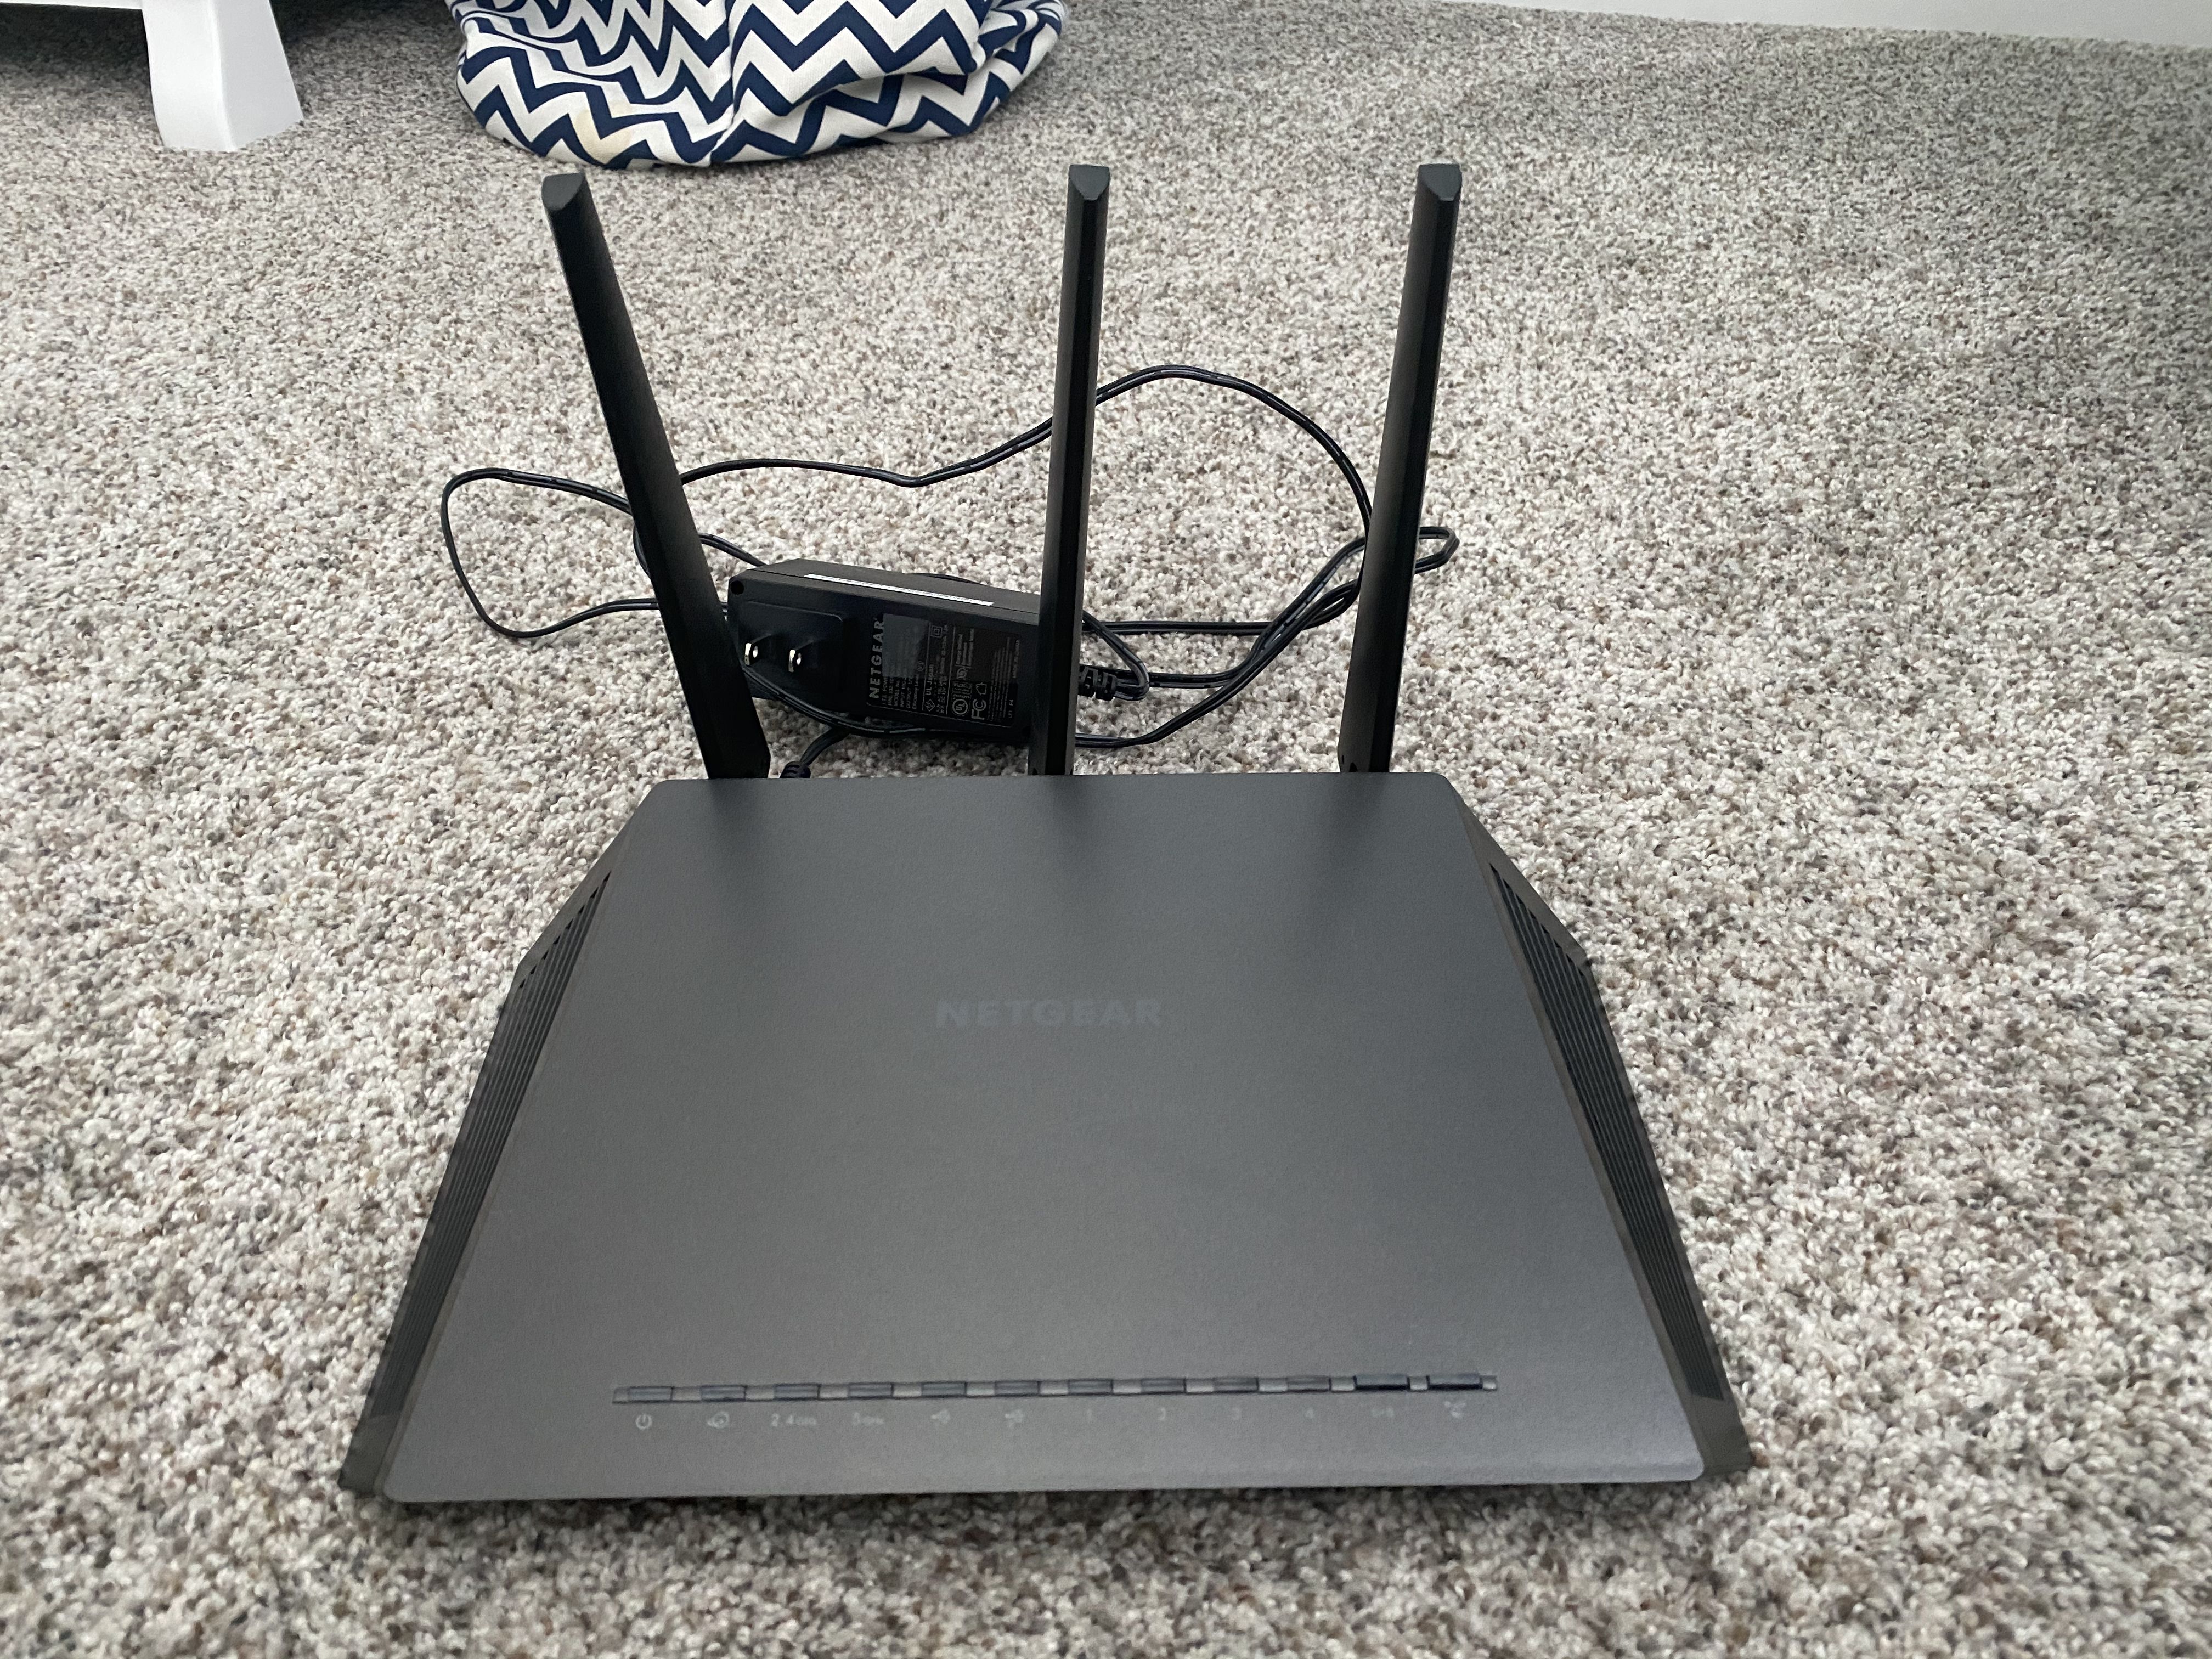 NETGEAR Nighthawk Smart WiFi Router (R7000P) - AC2300 Wireless Speed (up to 2300 Mbps) | Up to 2000 sq ft Coverage & 35 Devices | 4 x 1G Ethernet and